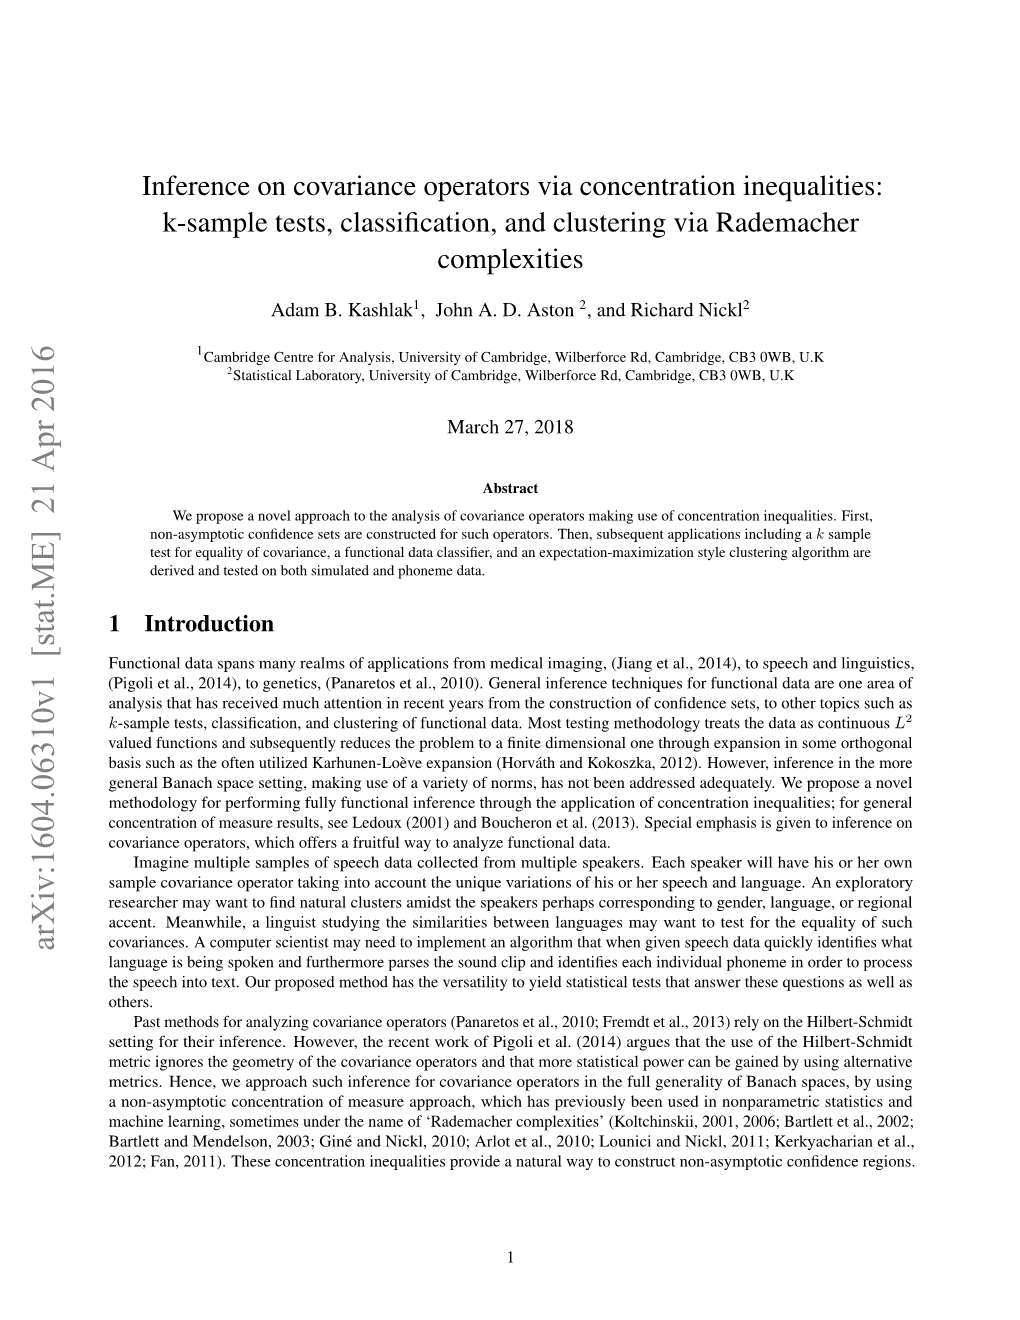 Inference on Covariance Operators Via Concentration Inequalities: K-Sample Tests, Classiﬁcation, and Clustering Via Rademacher Complexities